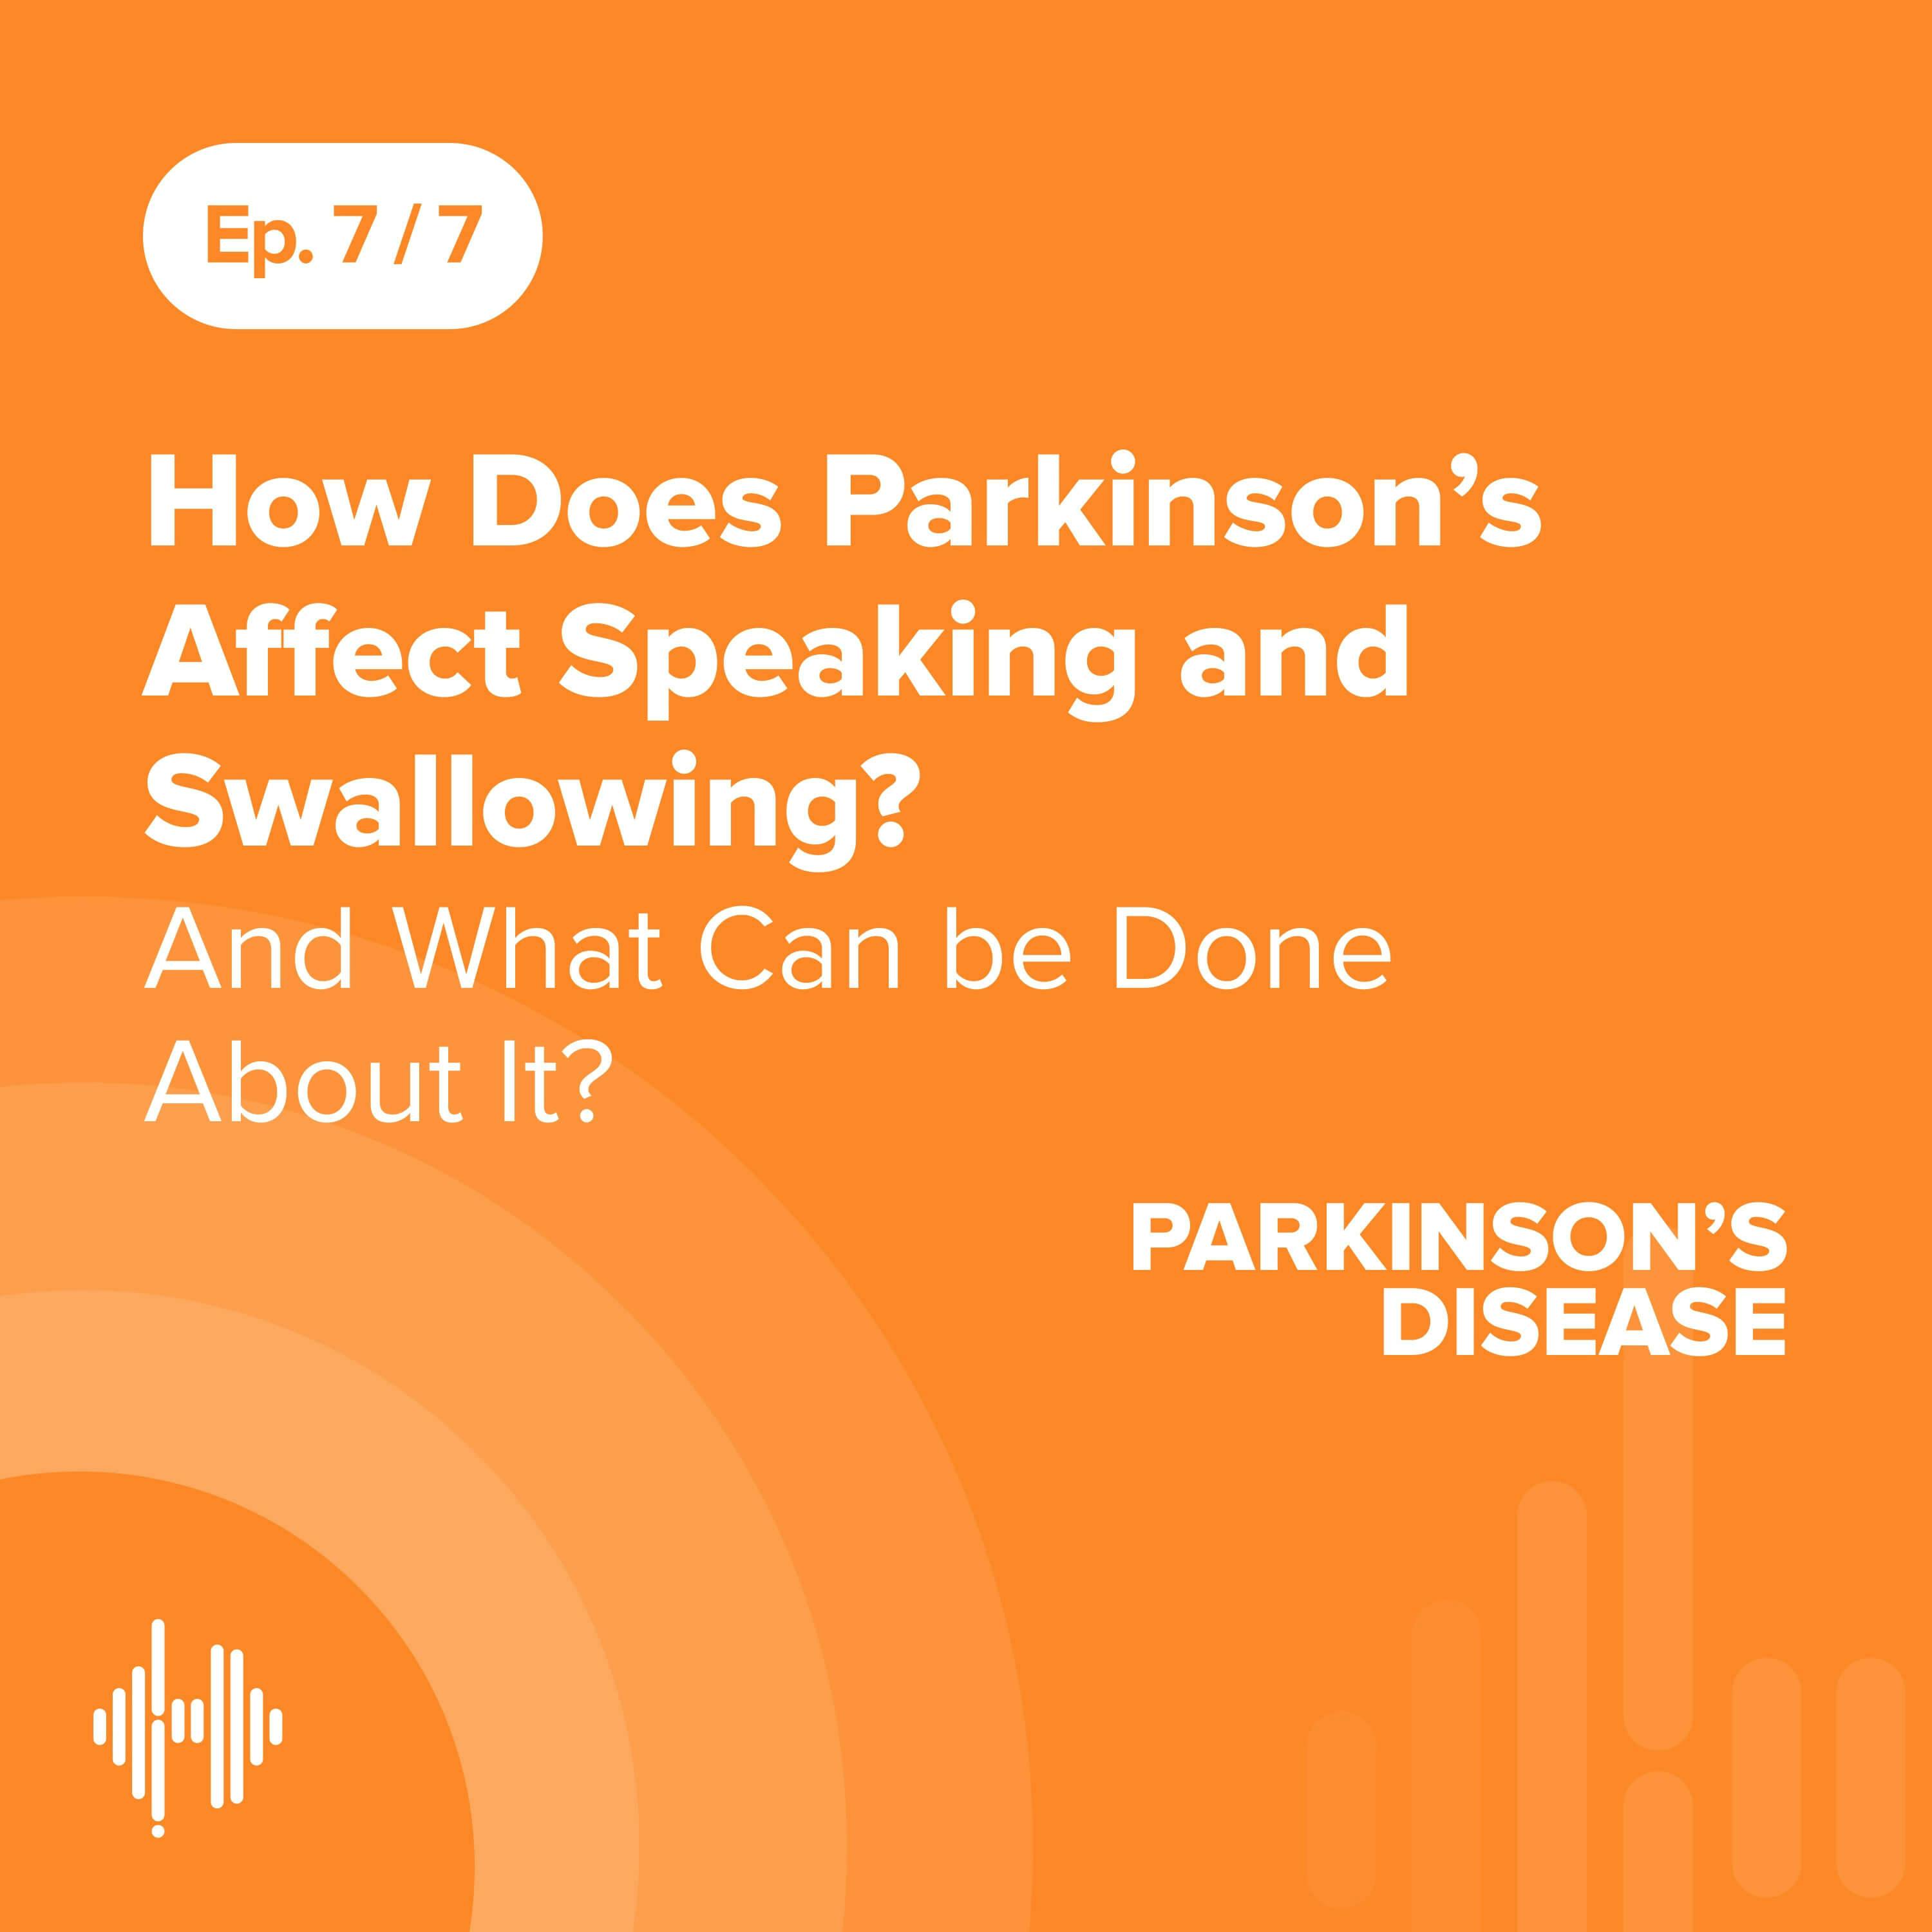 Ep 7: How Does Parkinson’s Affect Speaking and Swallowing? And What Can be Done About It?